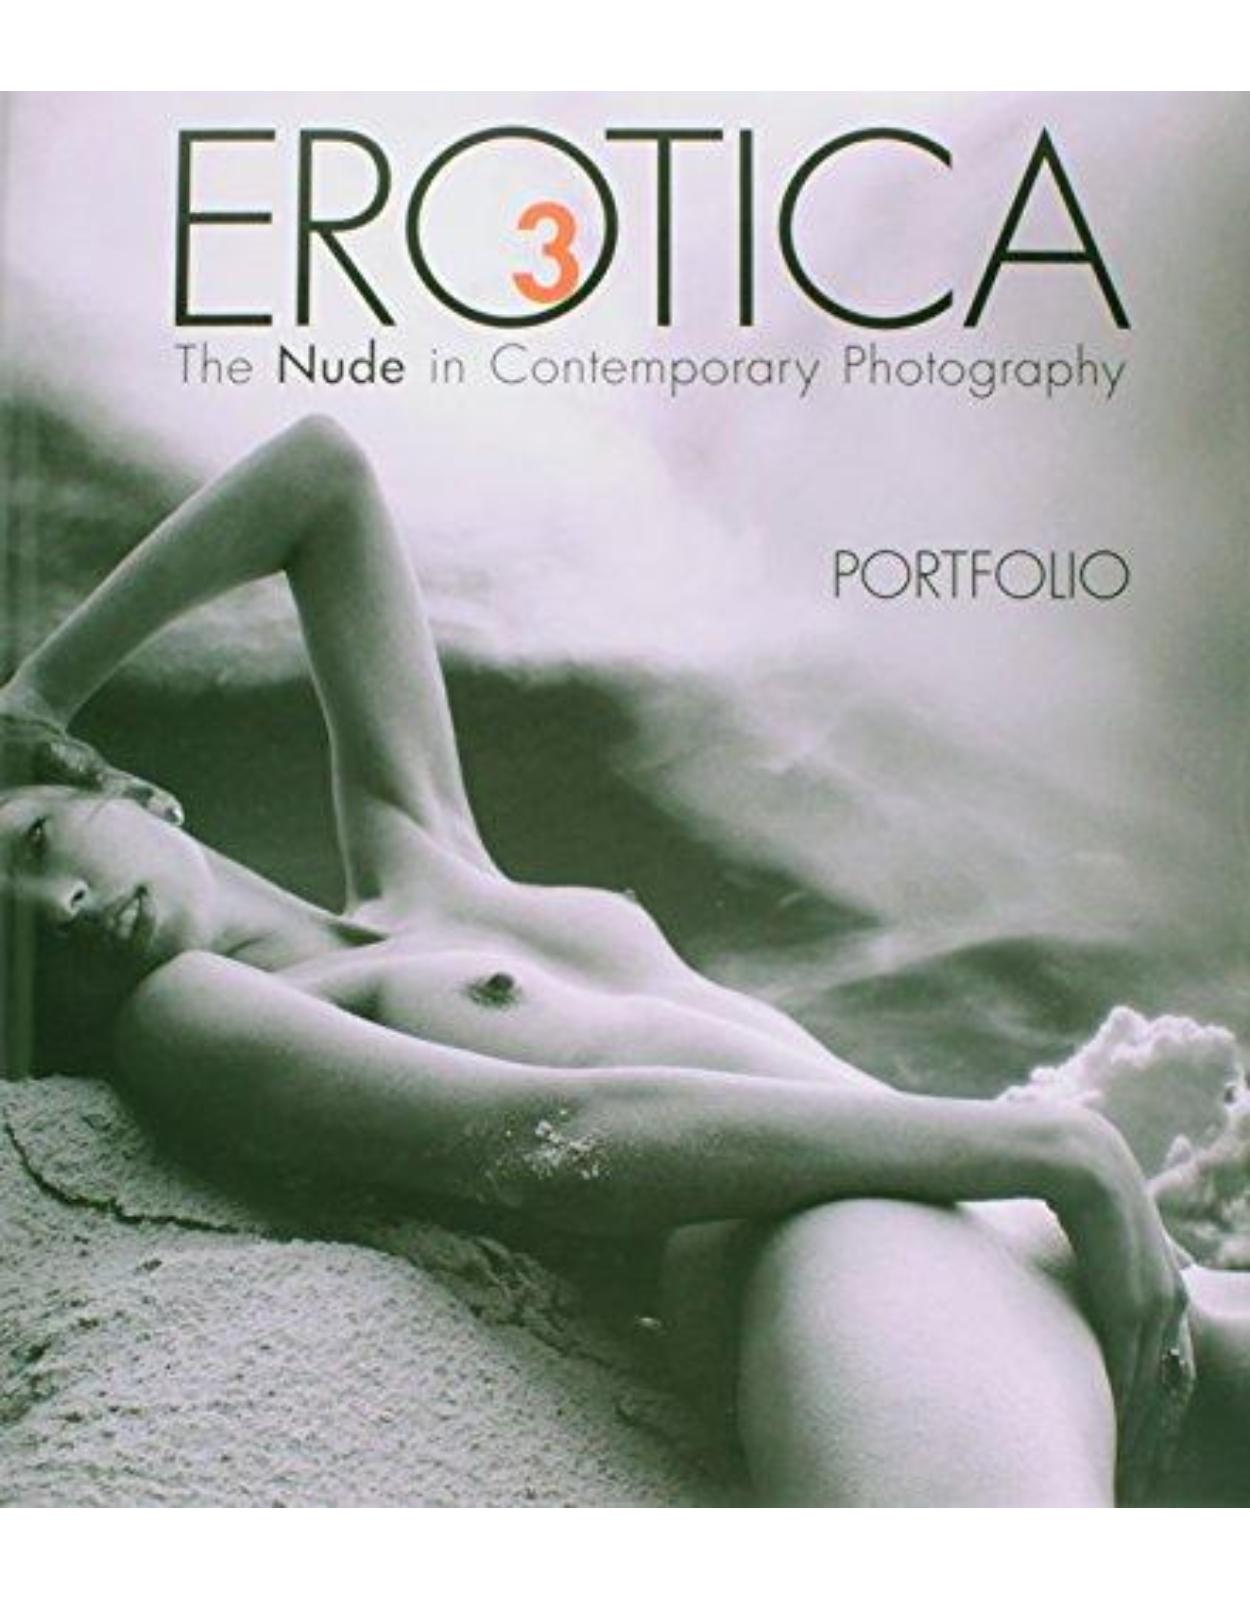 Erotica 3. The Nude in Contemporary Photography